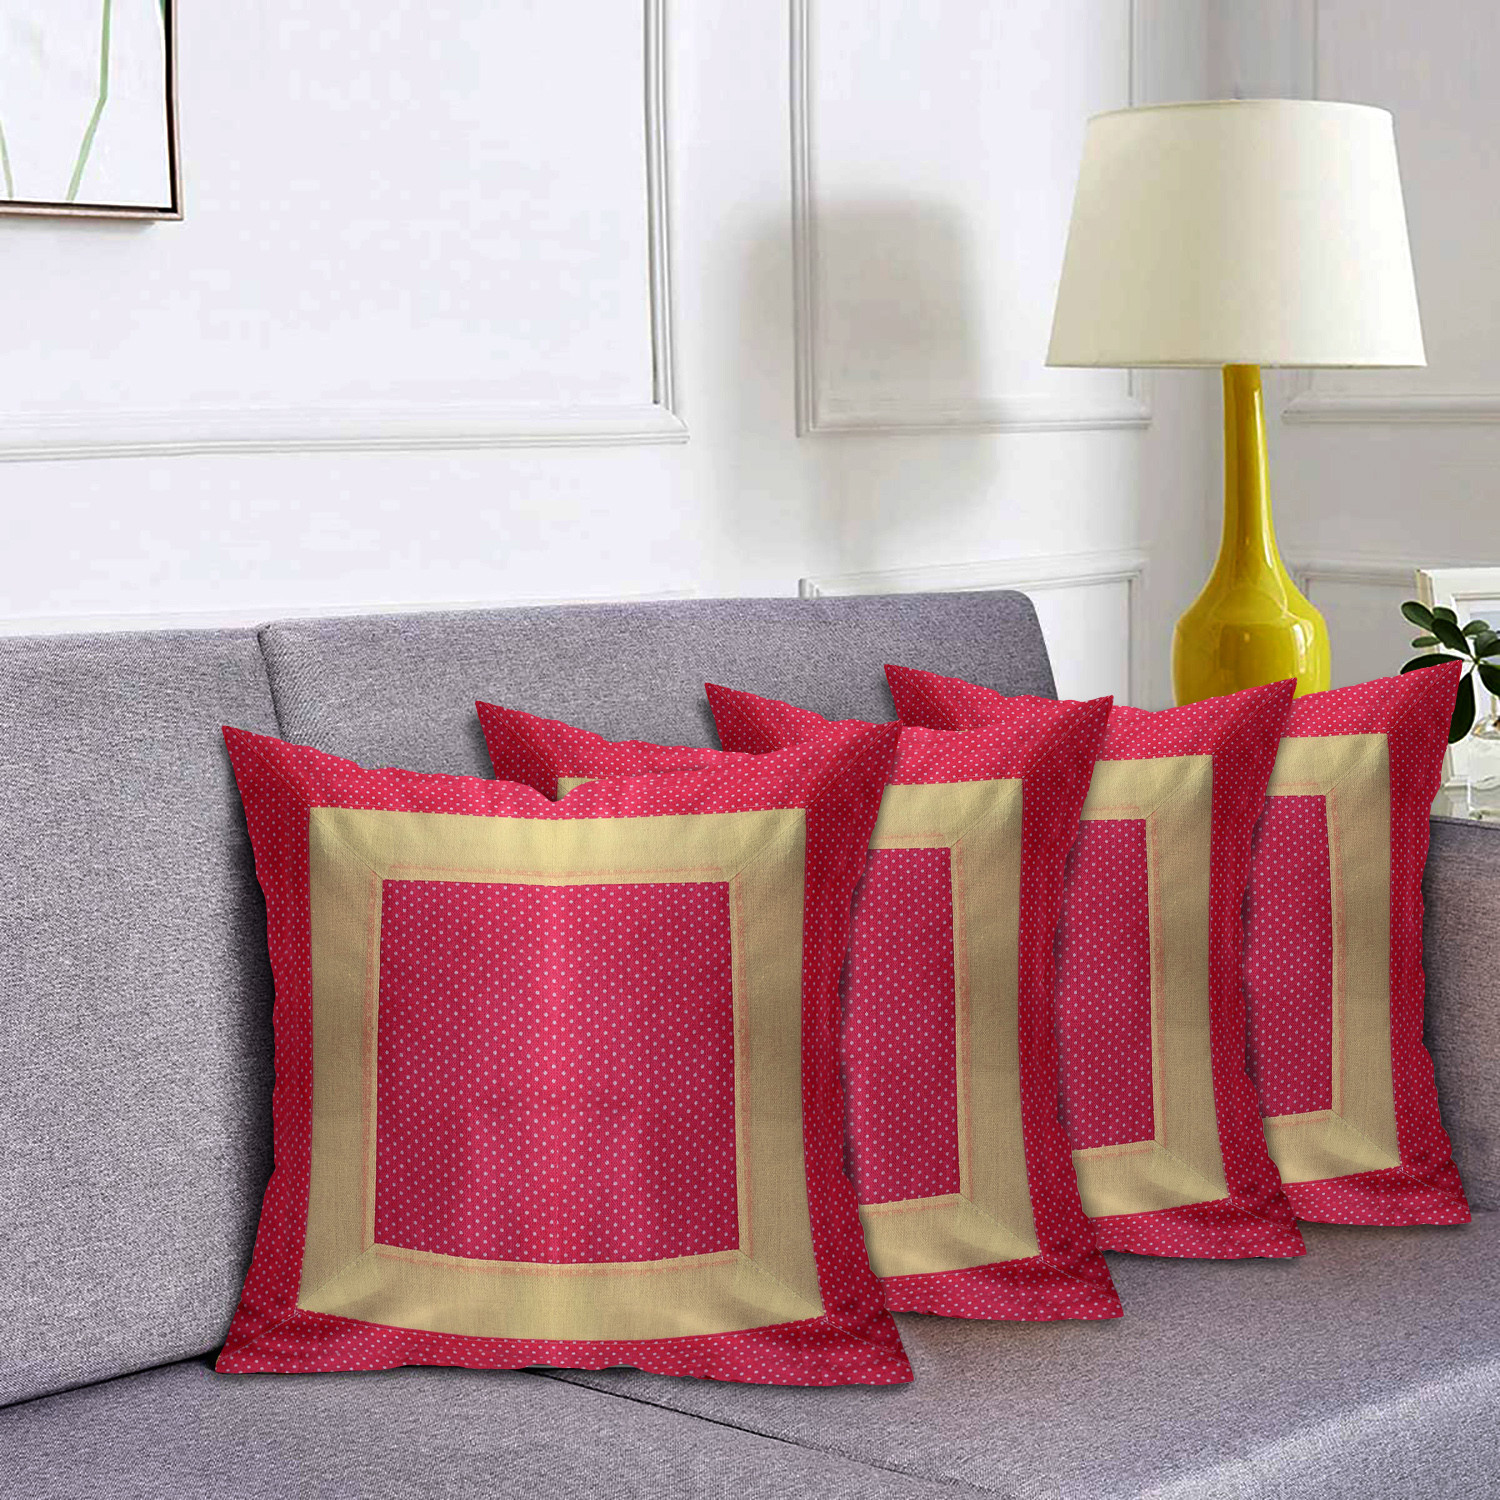 Kuber Industries Dot Print Soft Decorative Square Cushion Cover, Cushion Case For Sofa Couch Bed 16x16 Inch-(Pink)